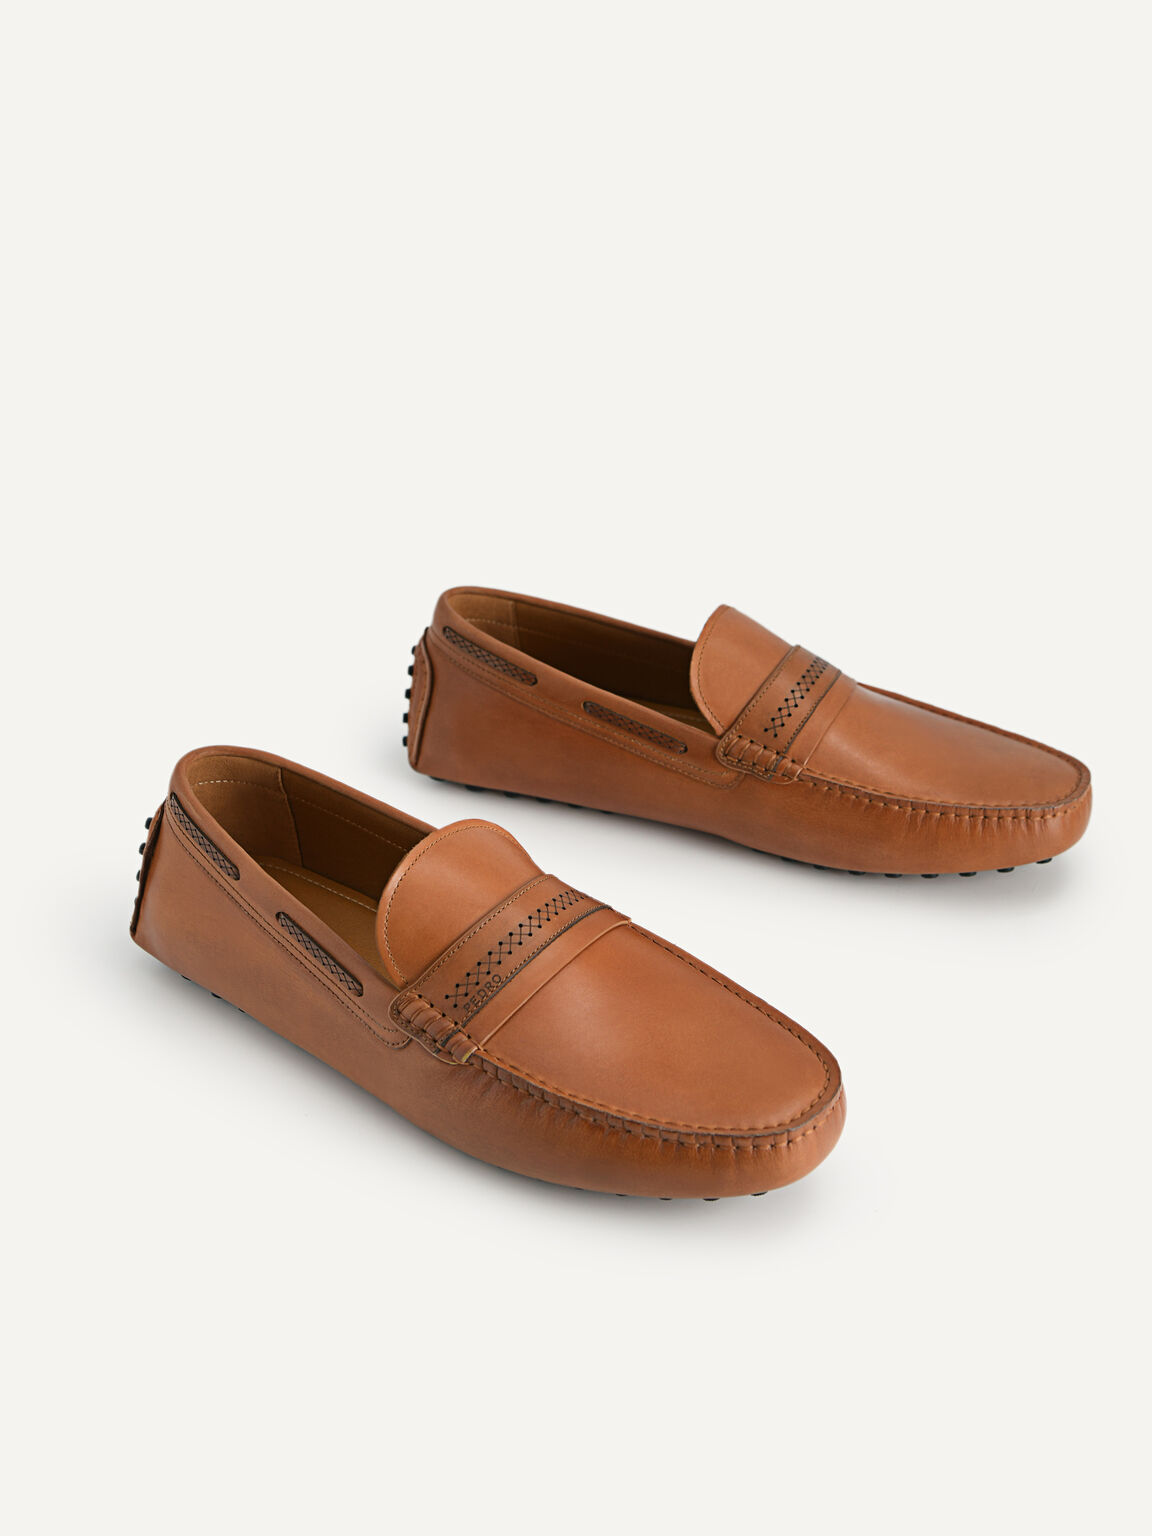 Leather Moccasins with Stitch Detailing, Camel, hi-res